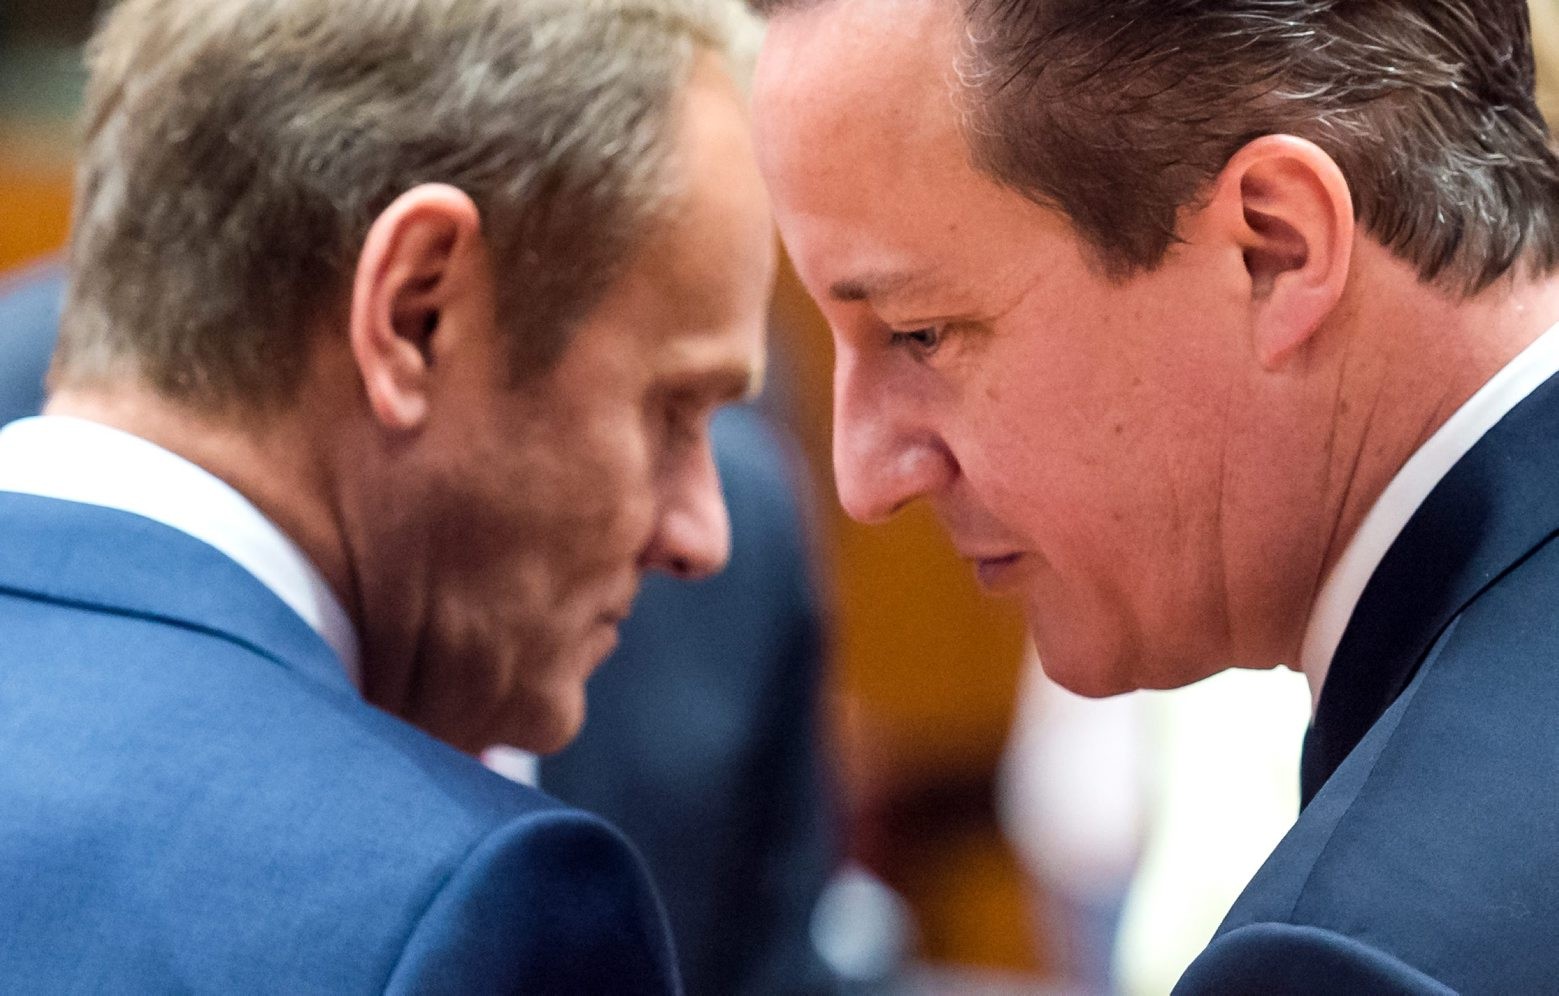 FILE - In this June 26, 2015 file photo, European Council President Donald Tusk, left, speaks with British Prime Minister David Cameron during a round table meeting at an EU summit in Brussels. European Council President Donald Tusk on Tuesday February 2, 2016 unveiled proposals that he hopes will keep Britain in the 28-nation European Union. (AP Photo/Geert Vanden Wijngaert, File) EU Britain Europe